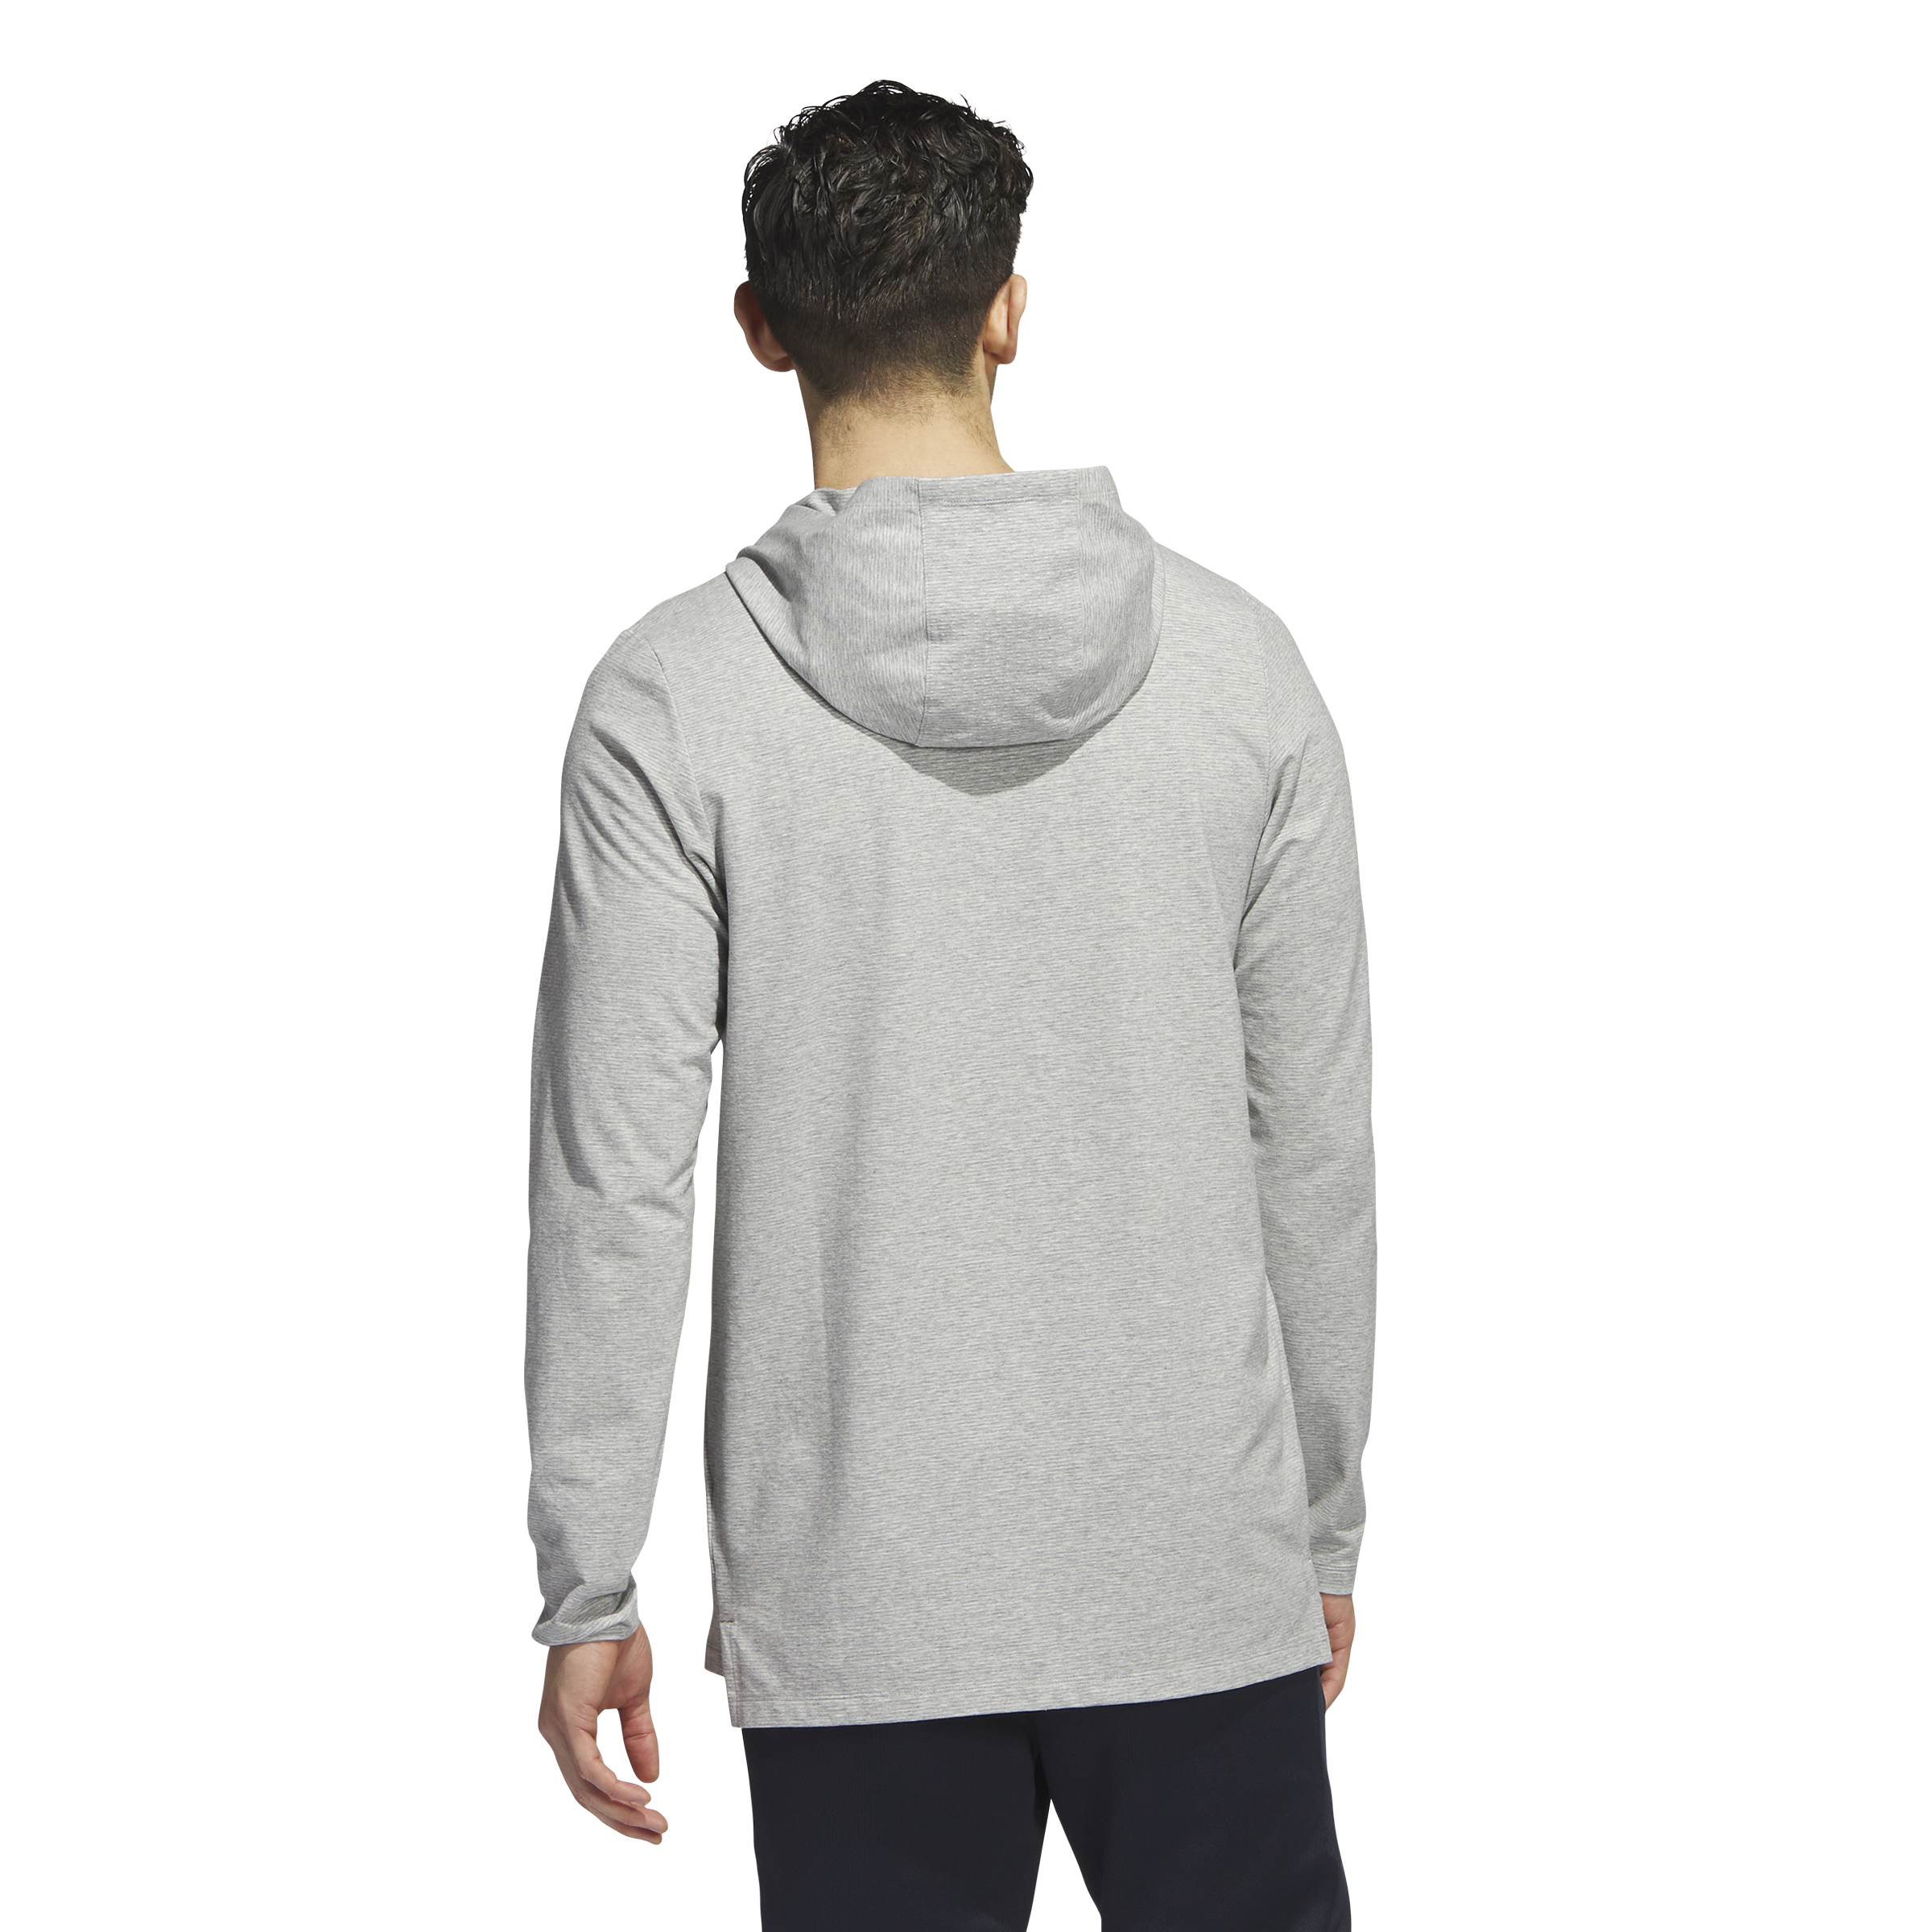 Mens Axis Tech Hooded Long Sleeve Top